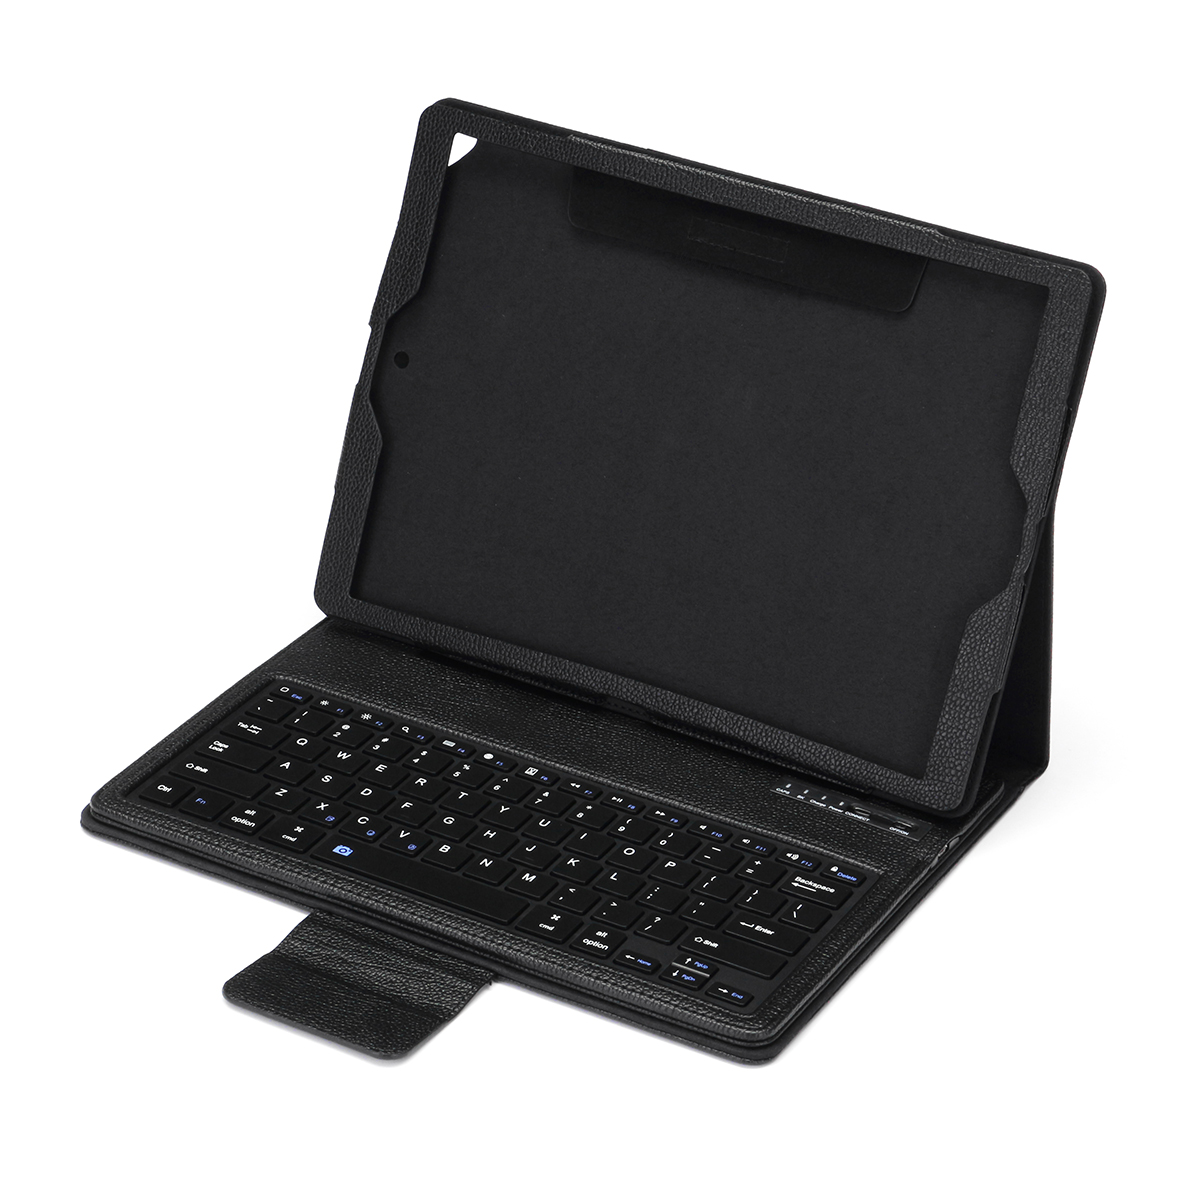 Wireless-Bluetooth-Detachable-Keyboard-Case-For-iPad-Pro-129quot-2015iPad-Pro-129quot-2017-1411374